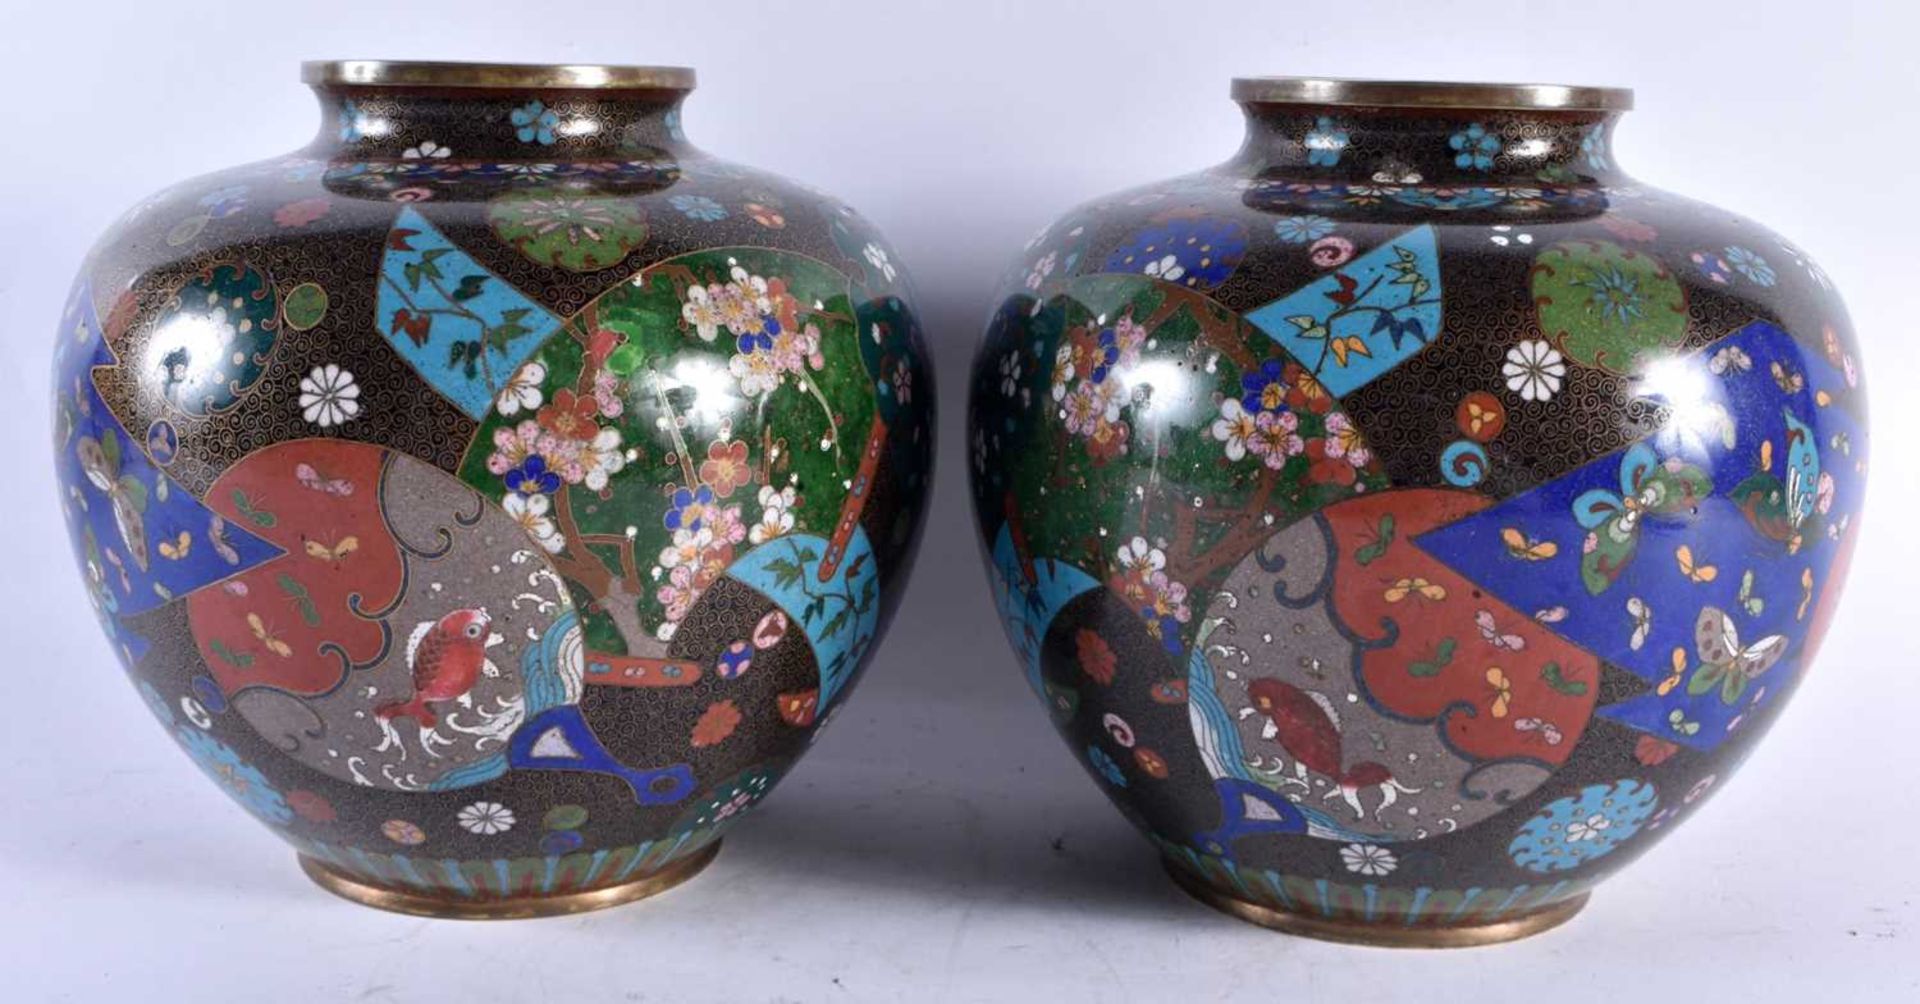 A LARGE PAIR OF 19TH CENTURY JAPANESE MEIJI PERIOD CLOISONNE ENAMEL VASES decorative with panels - Image 2 of 5